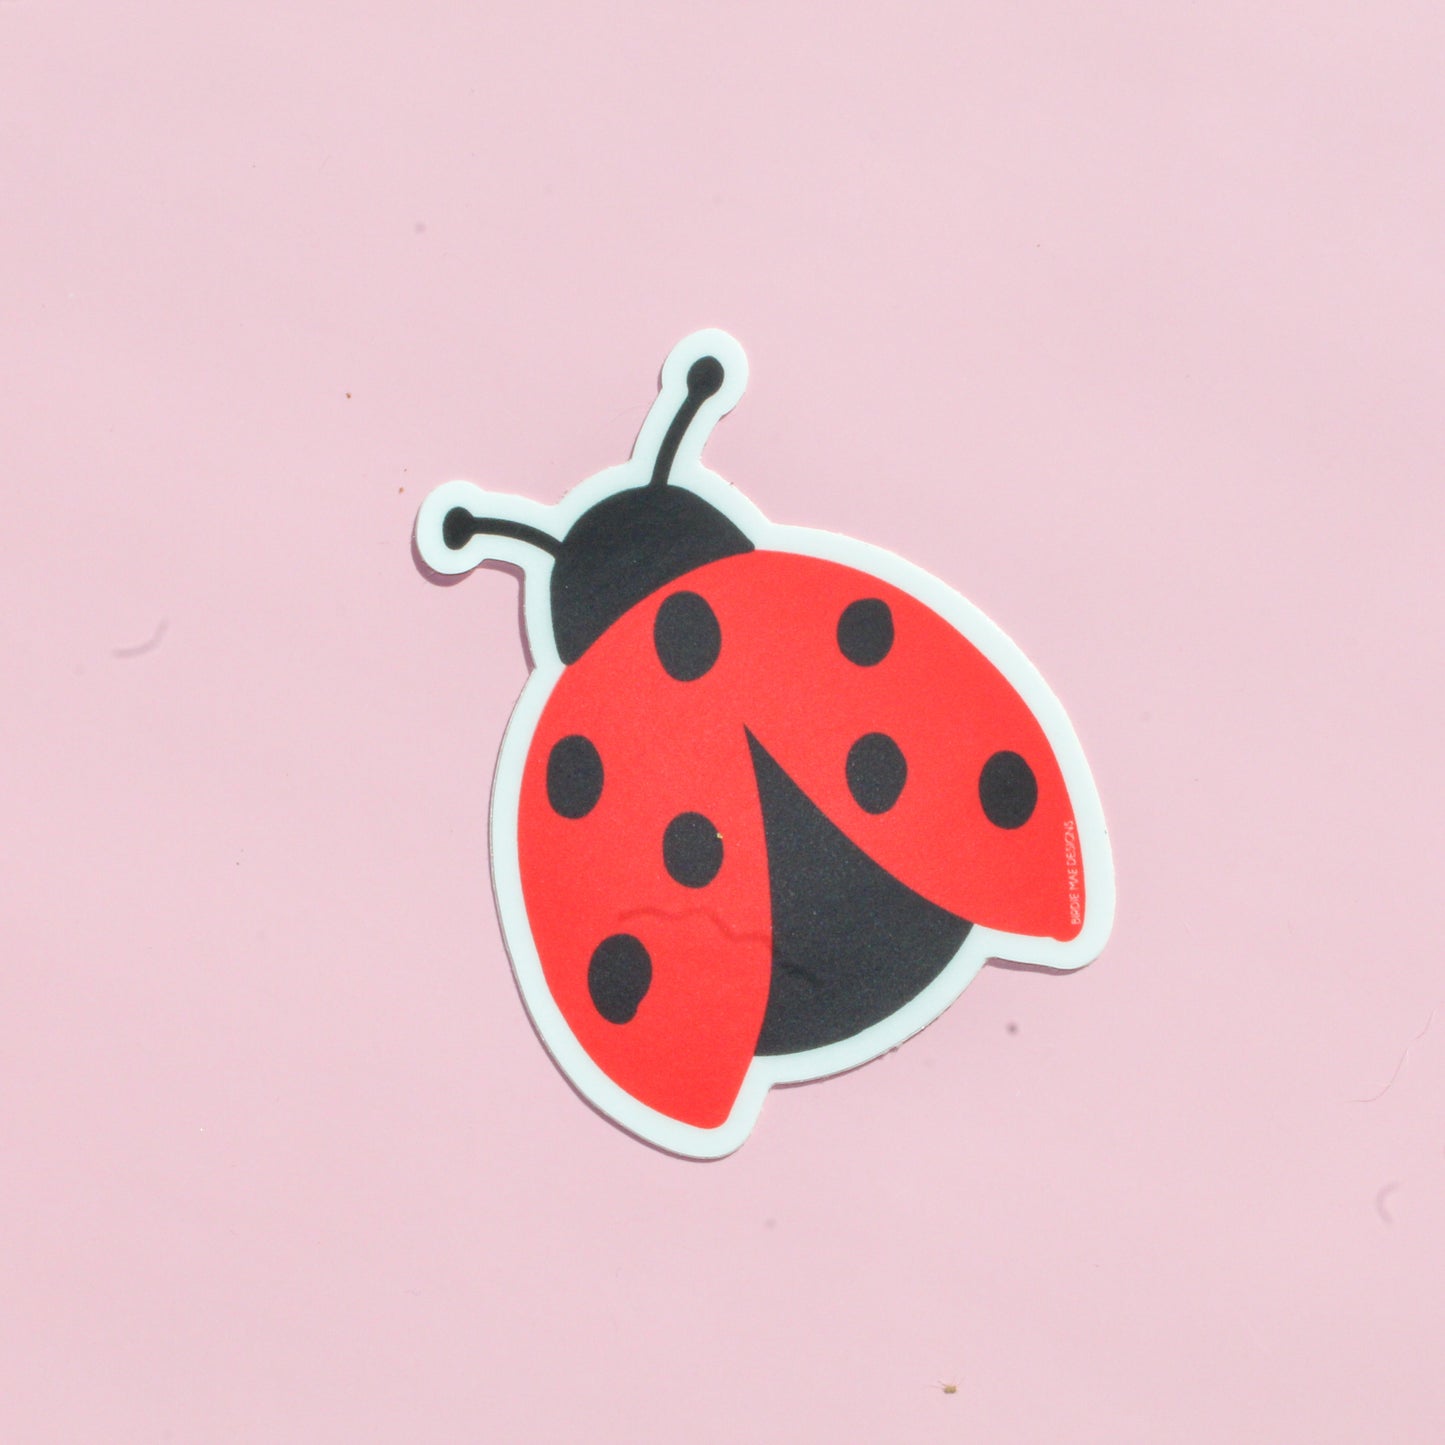 Our lady bug sticker is the perfect reminder for the love bug in your life that you are thinking about them. Made with durable waterproof vinyl and dishwasher safe, your loved one can place it on their tumbler, laptop, or were ever they need the reminder you care.